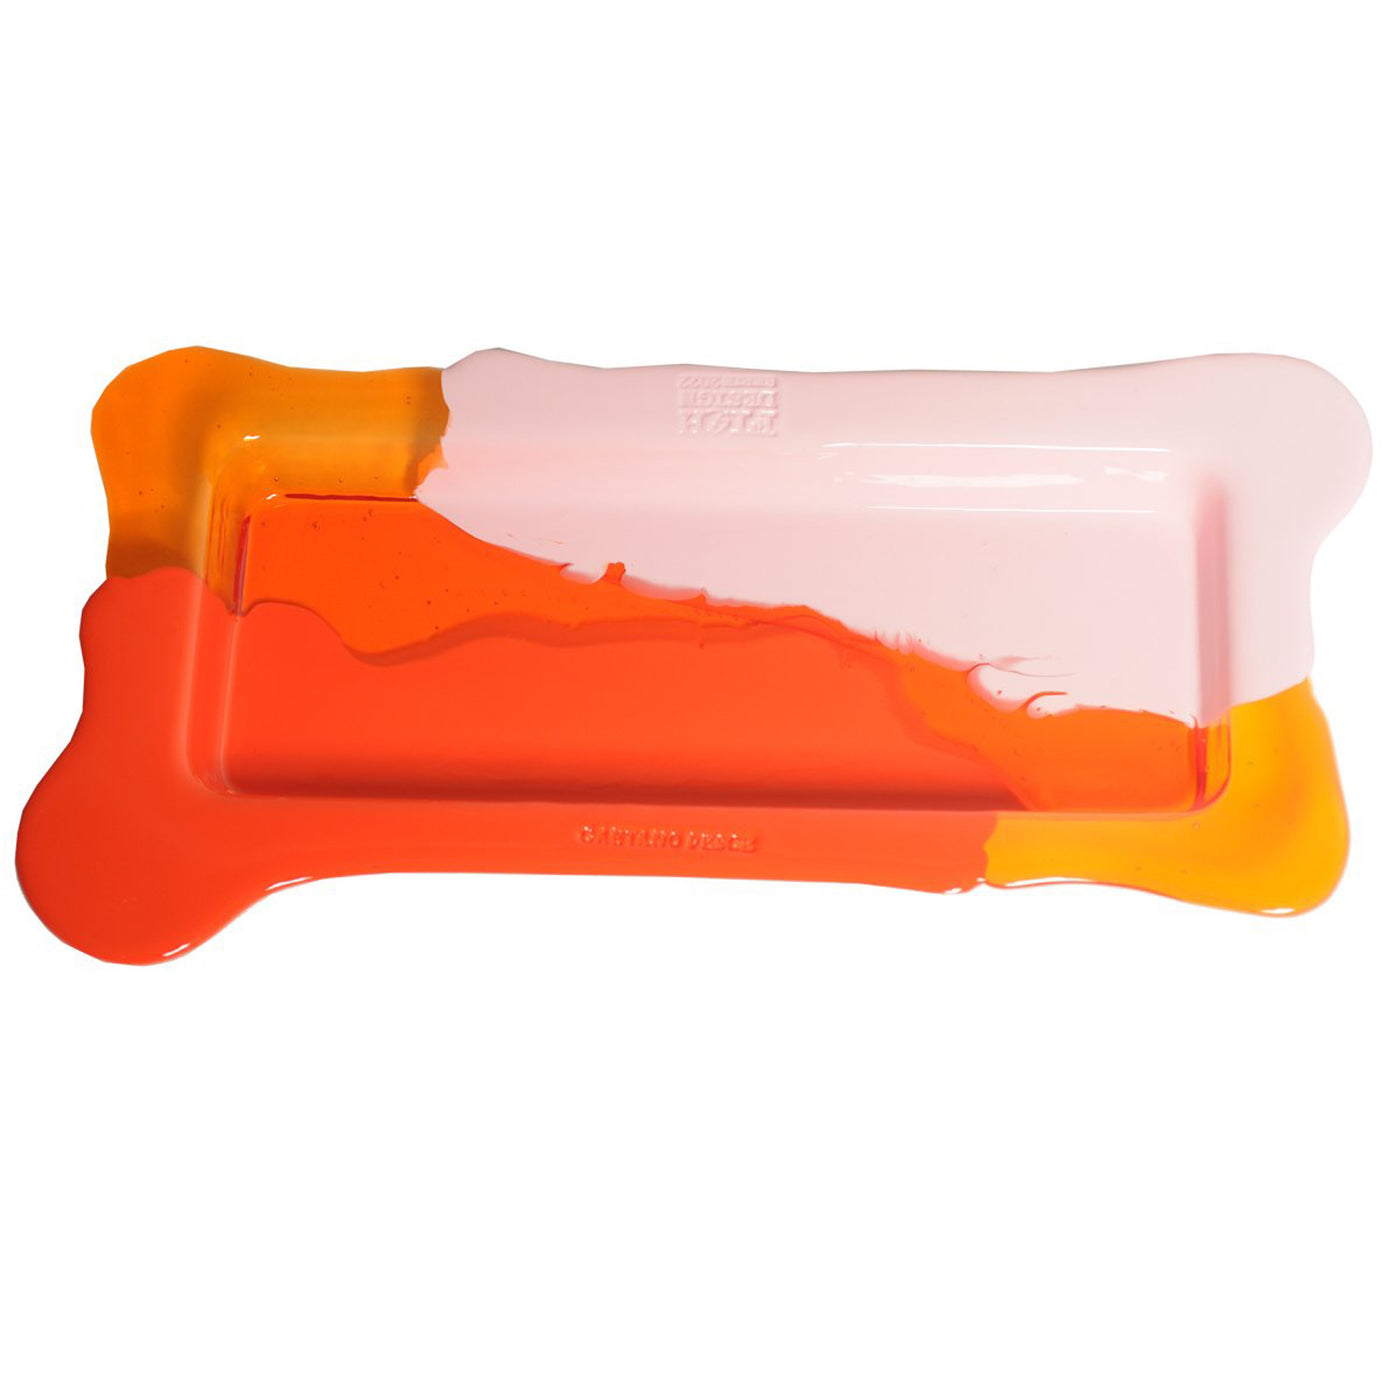 Resin Rectangular Tray TRY-TRAY Orange and Pink by Gaetano Pesce for Fish Design 01